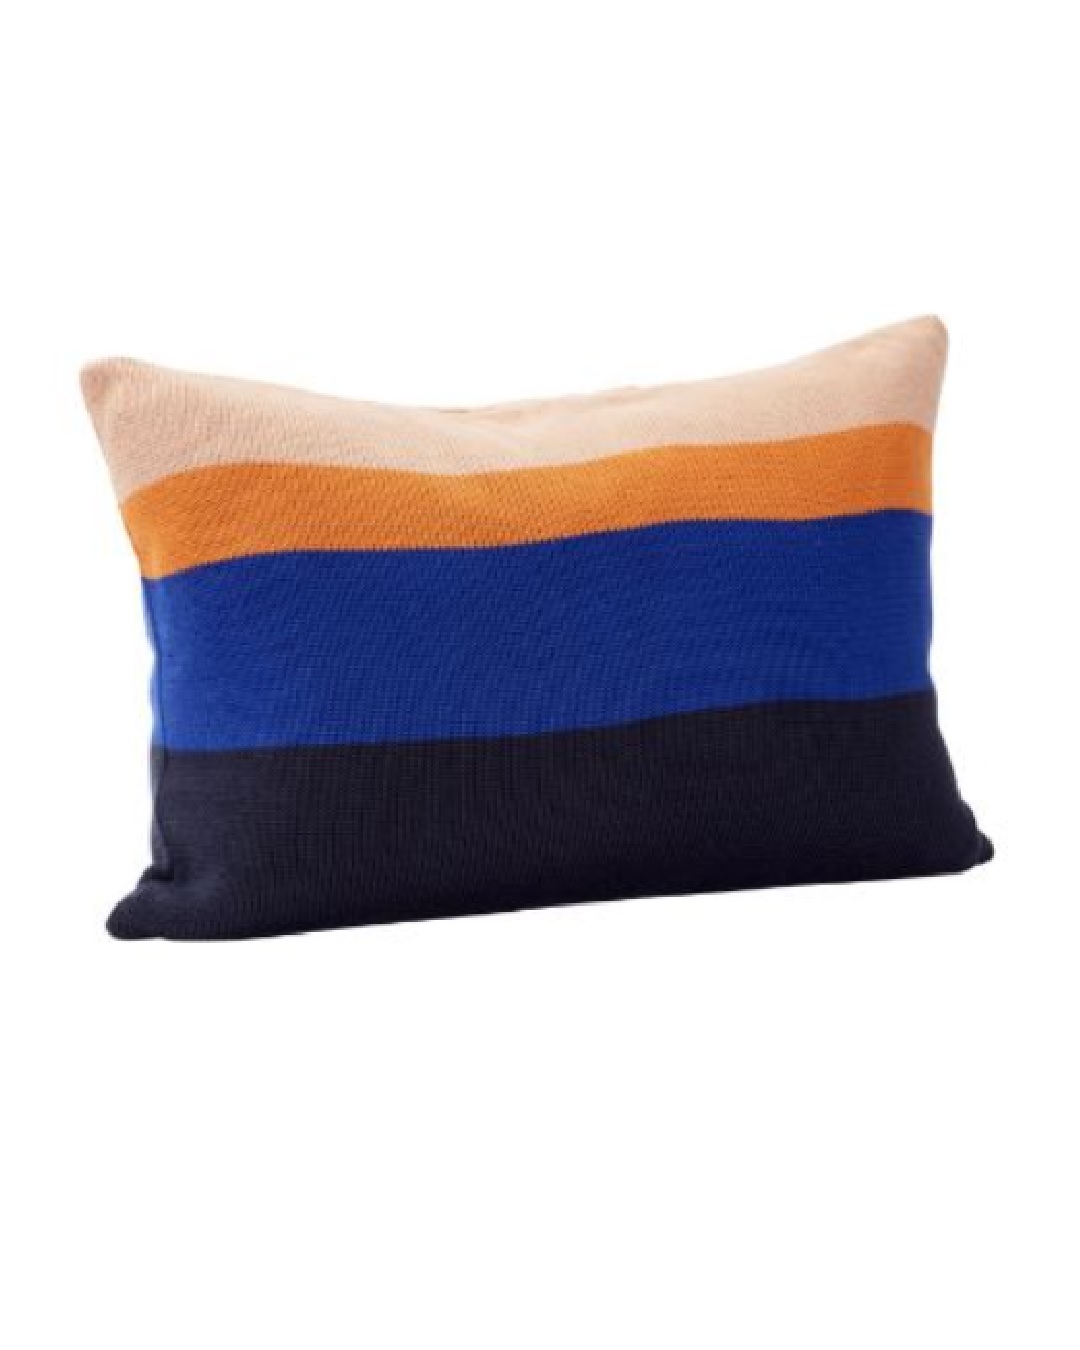 Blue and amber striped cushion